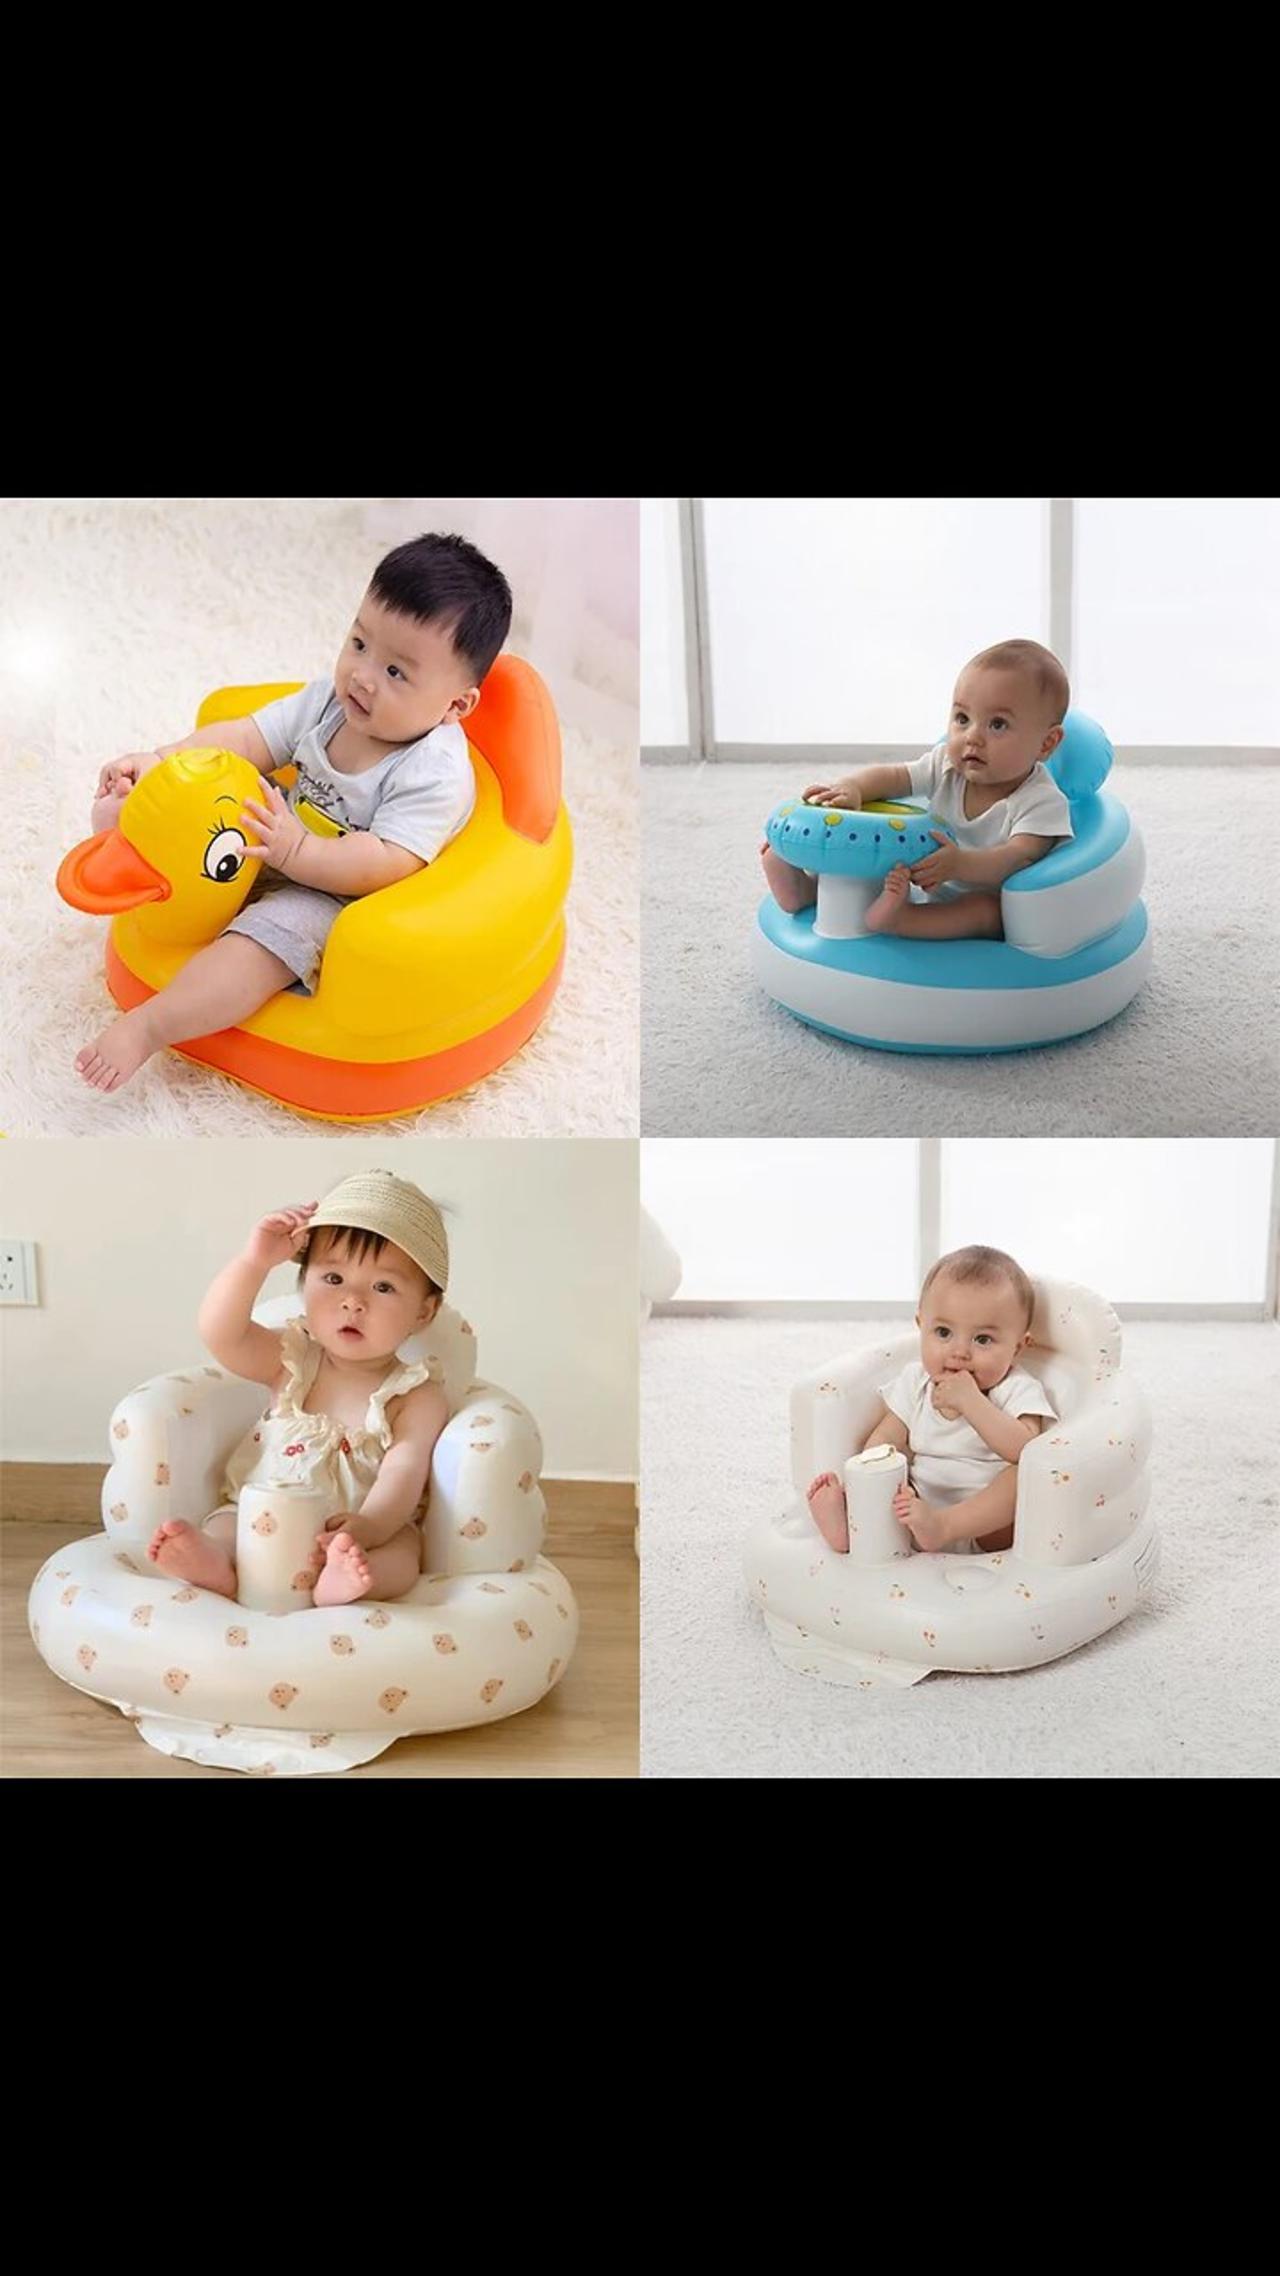 SALE!! Inflatable Armchair Child Support Seat